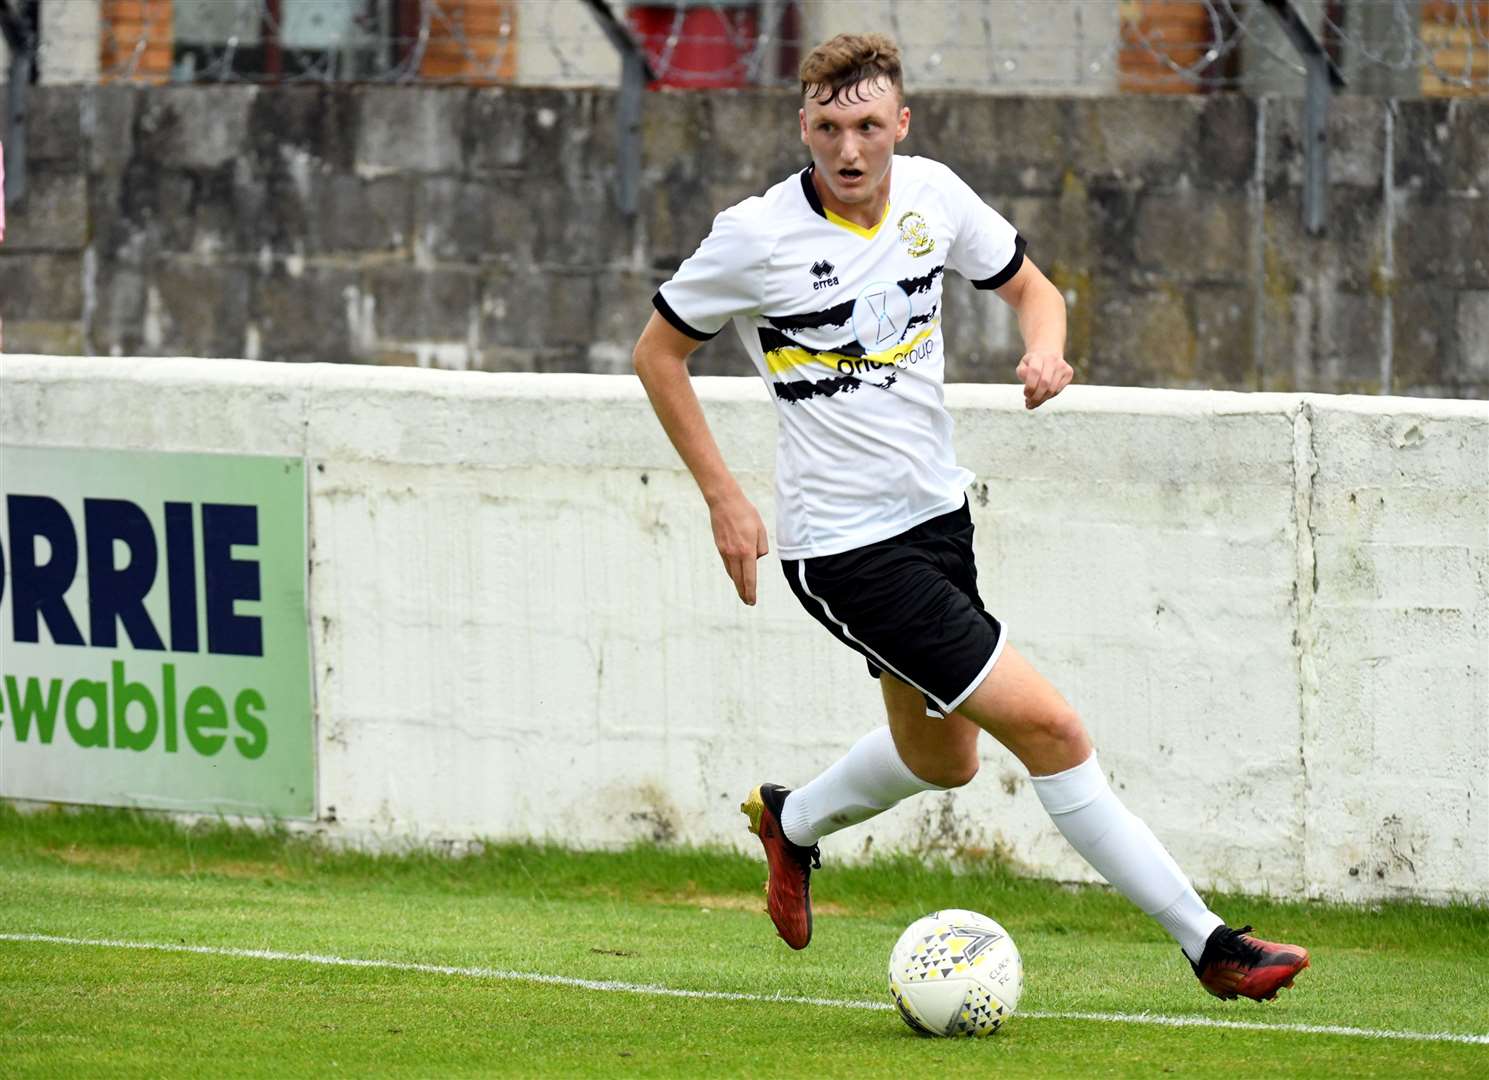 Connor Bunce scored twice against Rothes to help Clach into the North of Scotland Cup final. Picture: James Mackenzie